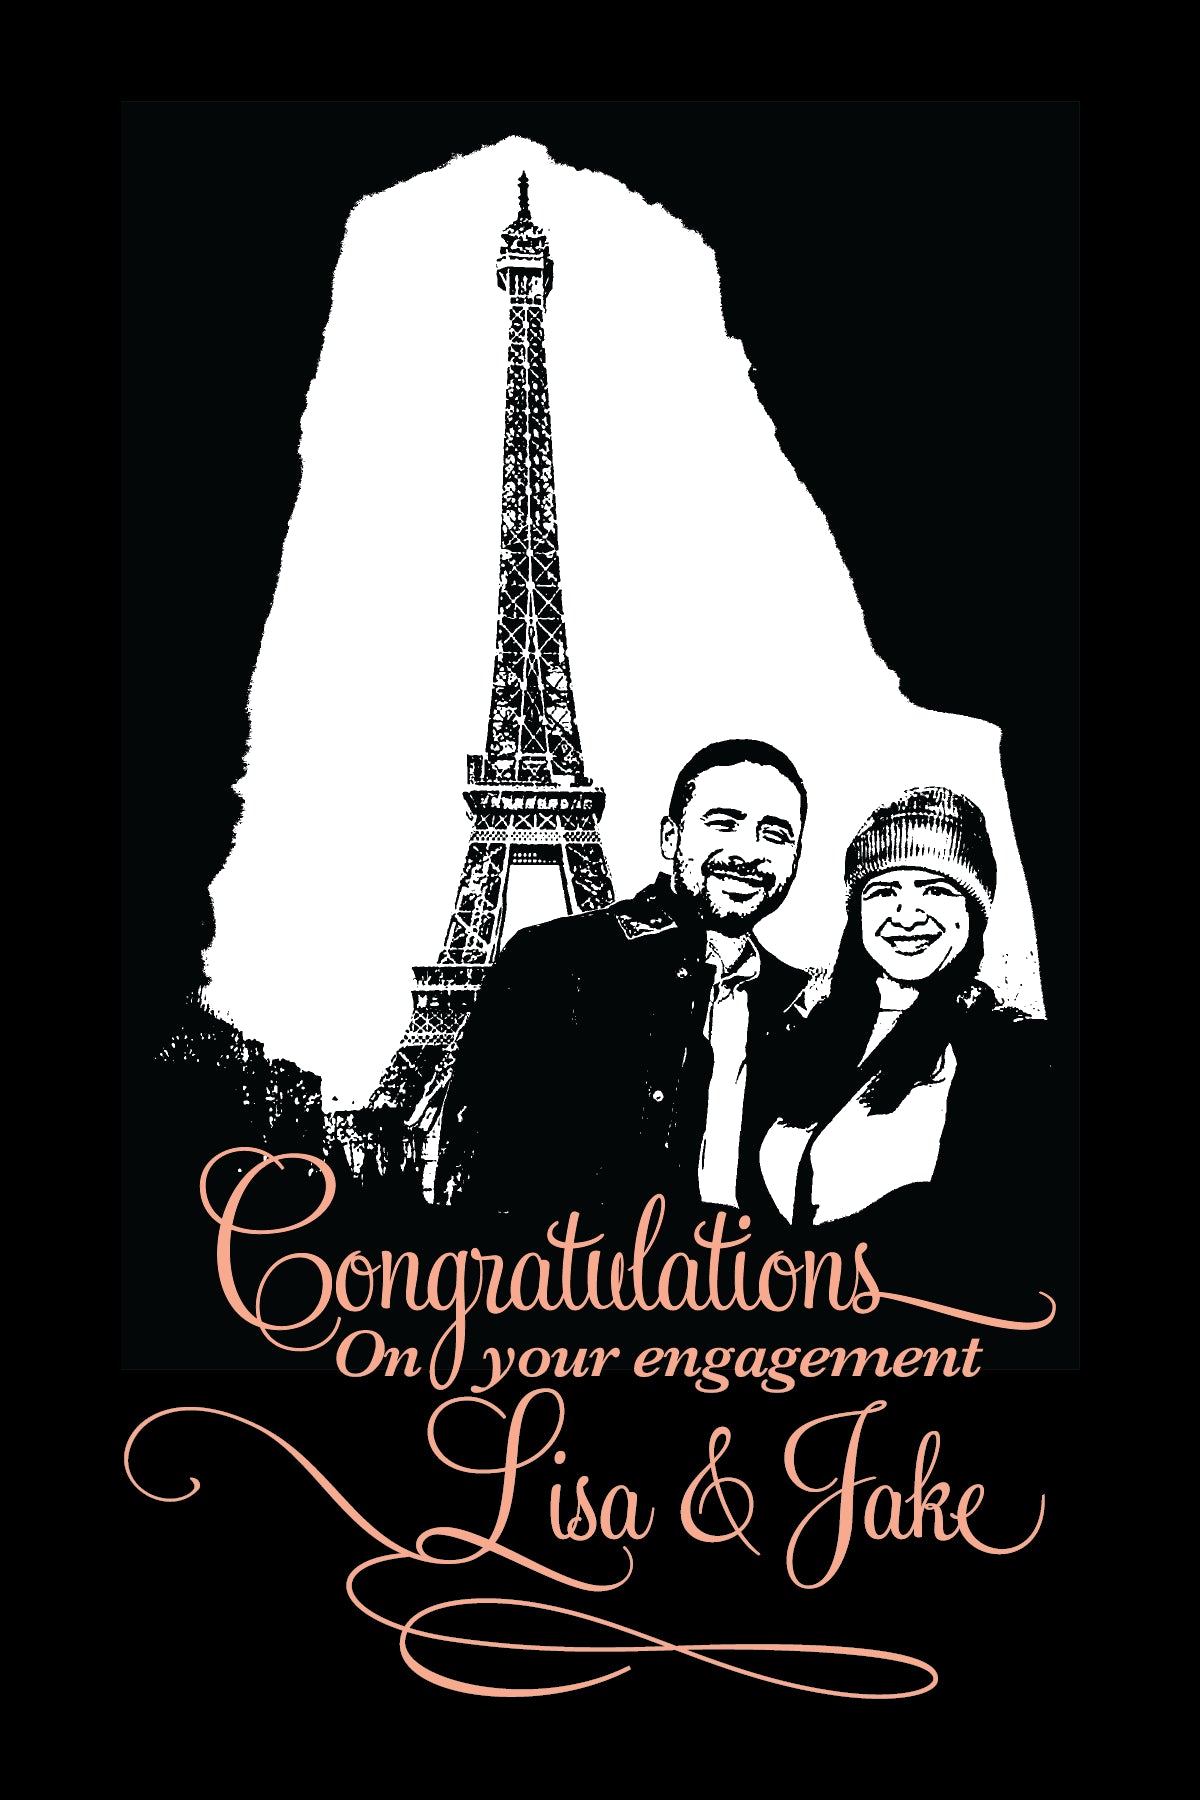 Upload Your Own Engagement Photo